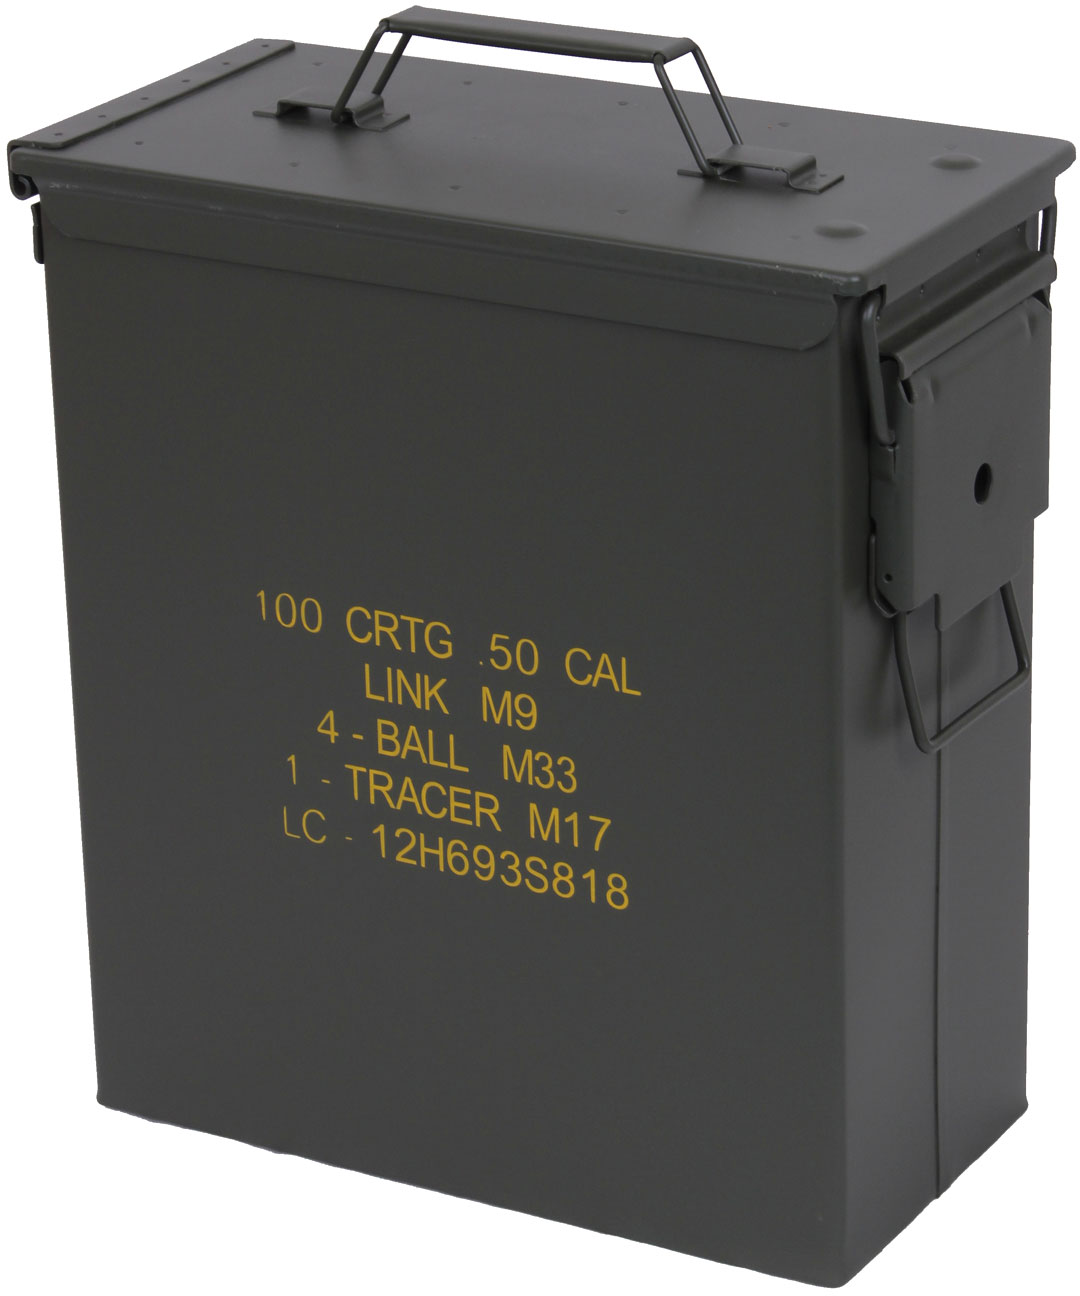 Rothco .50 Cal Steel Mil Spec Tall Ammo Can